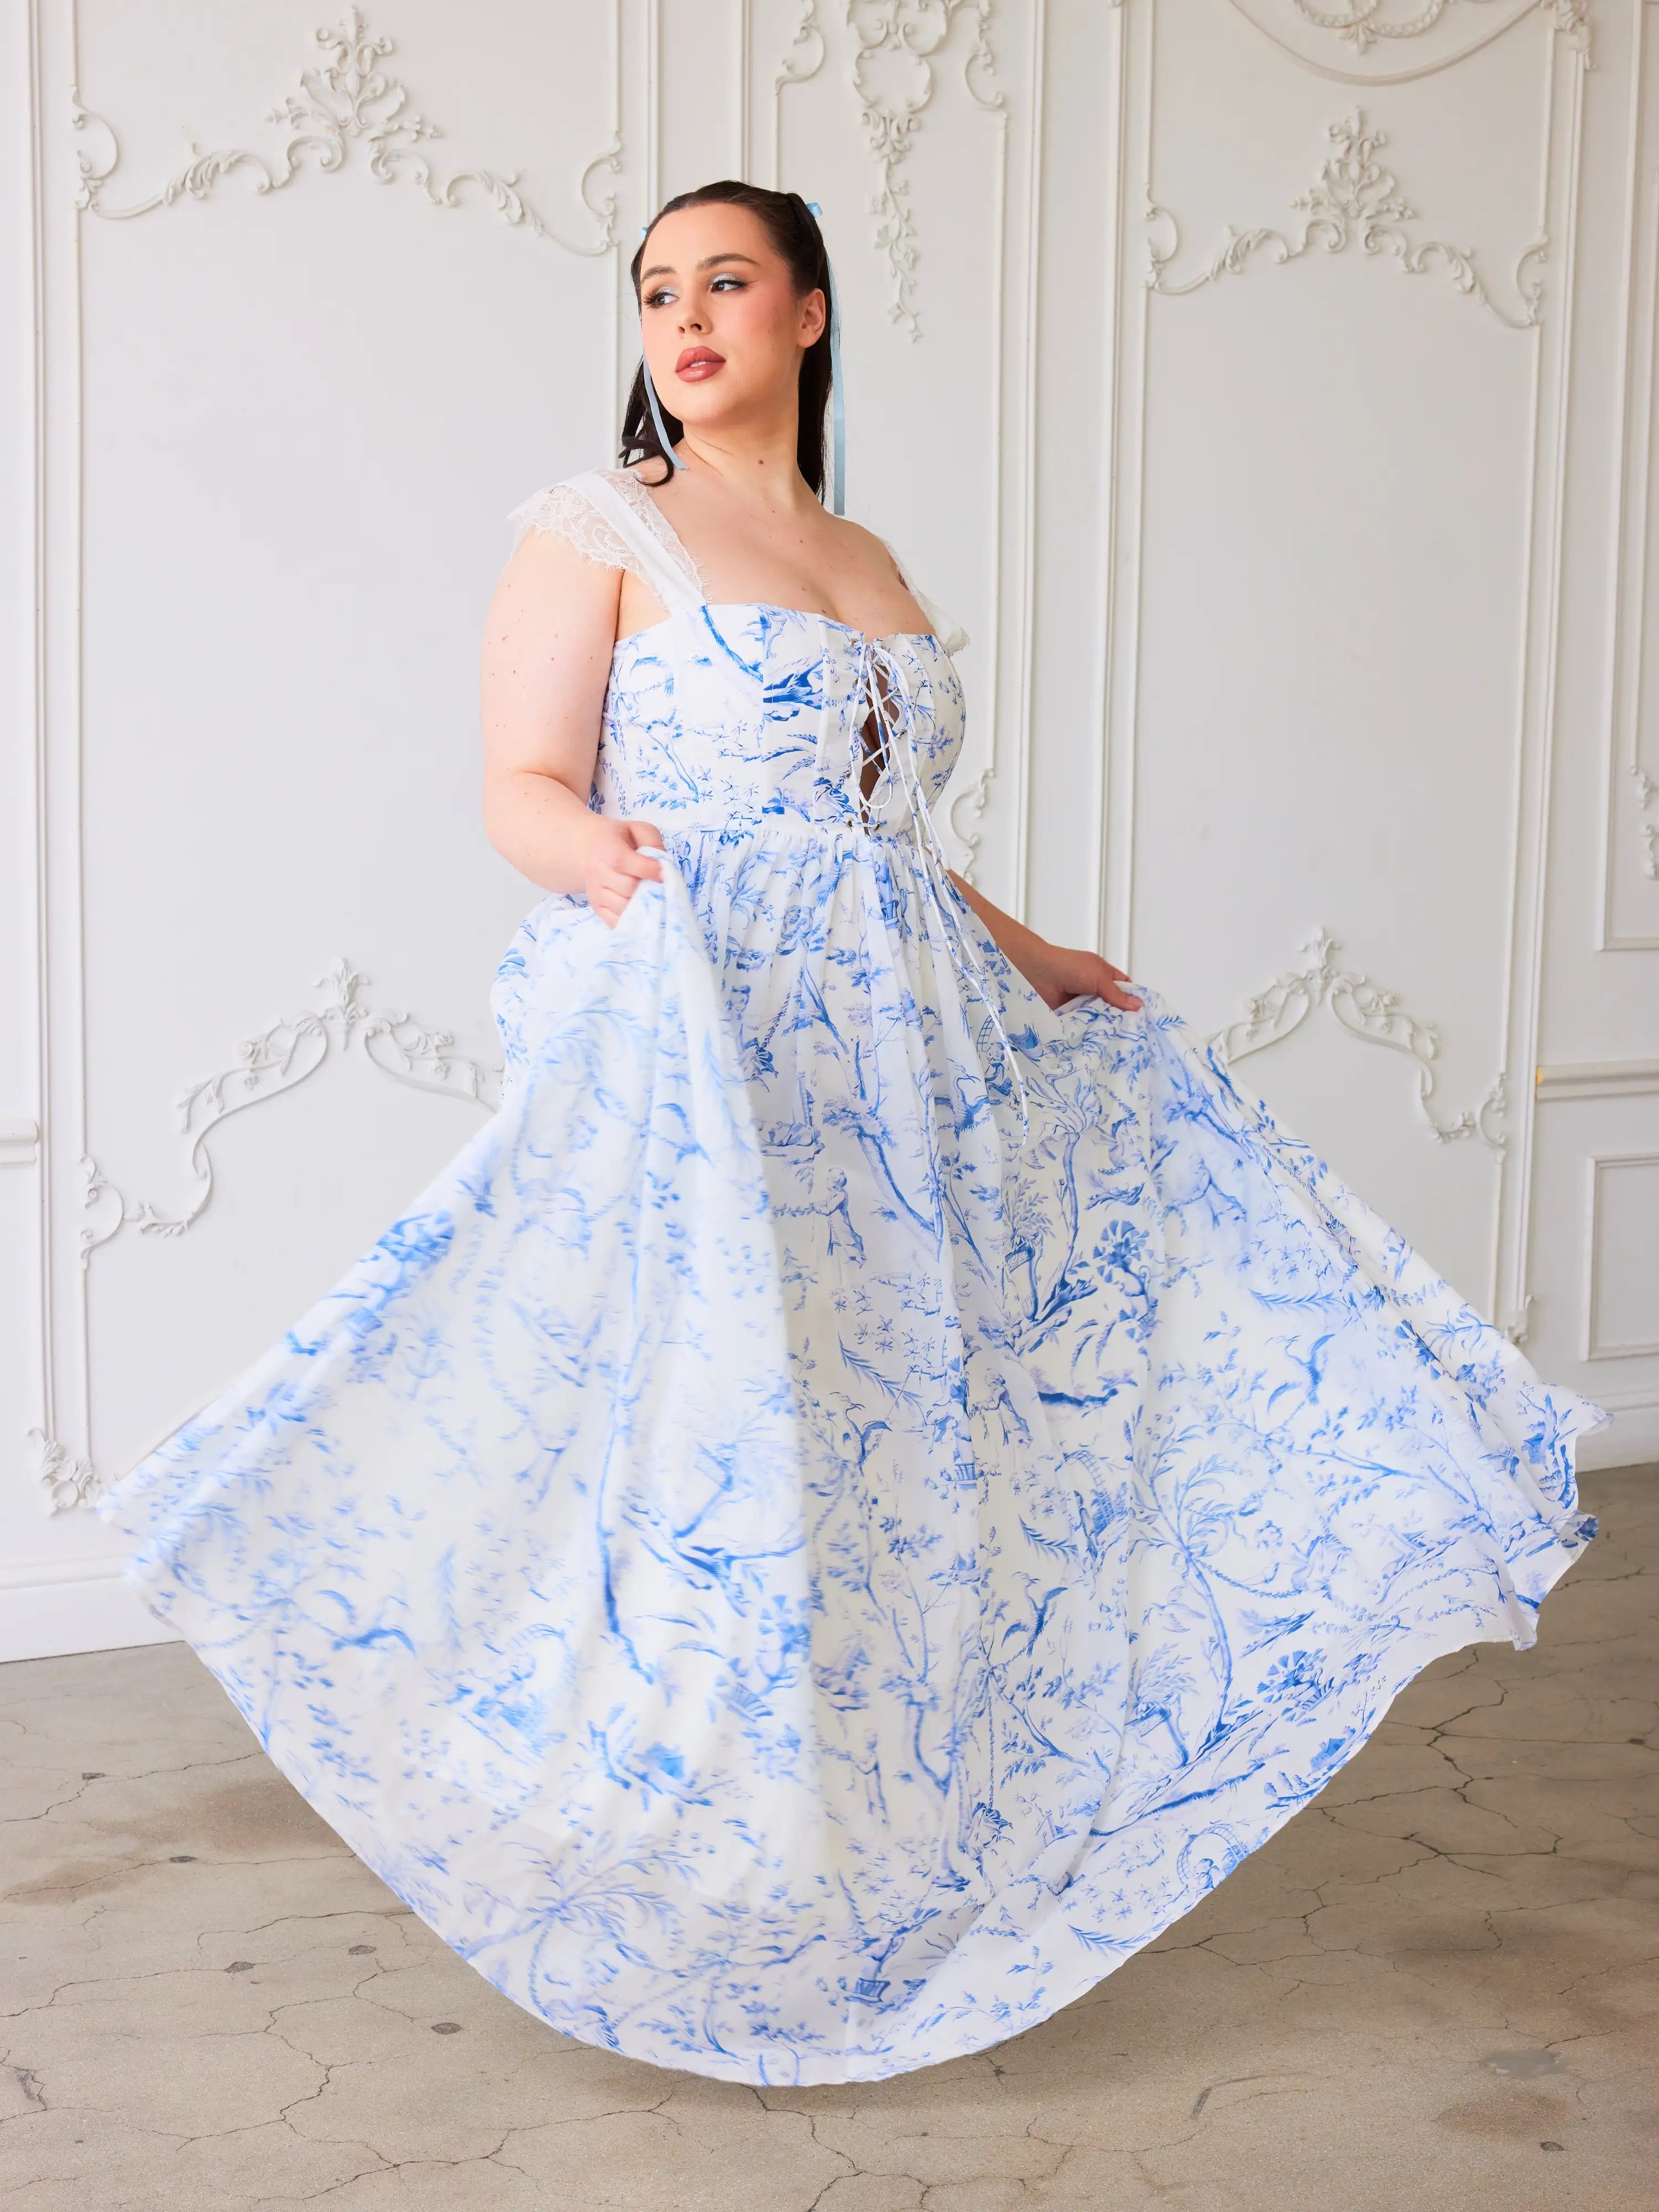 The Blue Toile Lovers Gown - The Lovers Gown; a poetic expression of romance and elegance, rendered in the timeless beauty of blue toile. This gown is a sartorial sonnet, crafted for those who find their hearts intertwined with the threads of whimsy and w